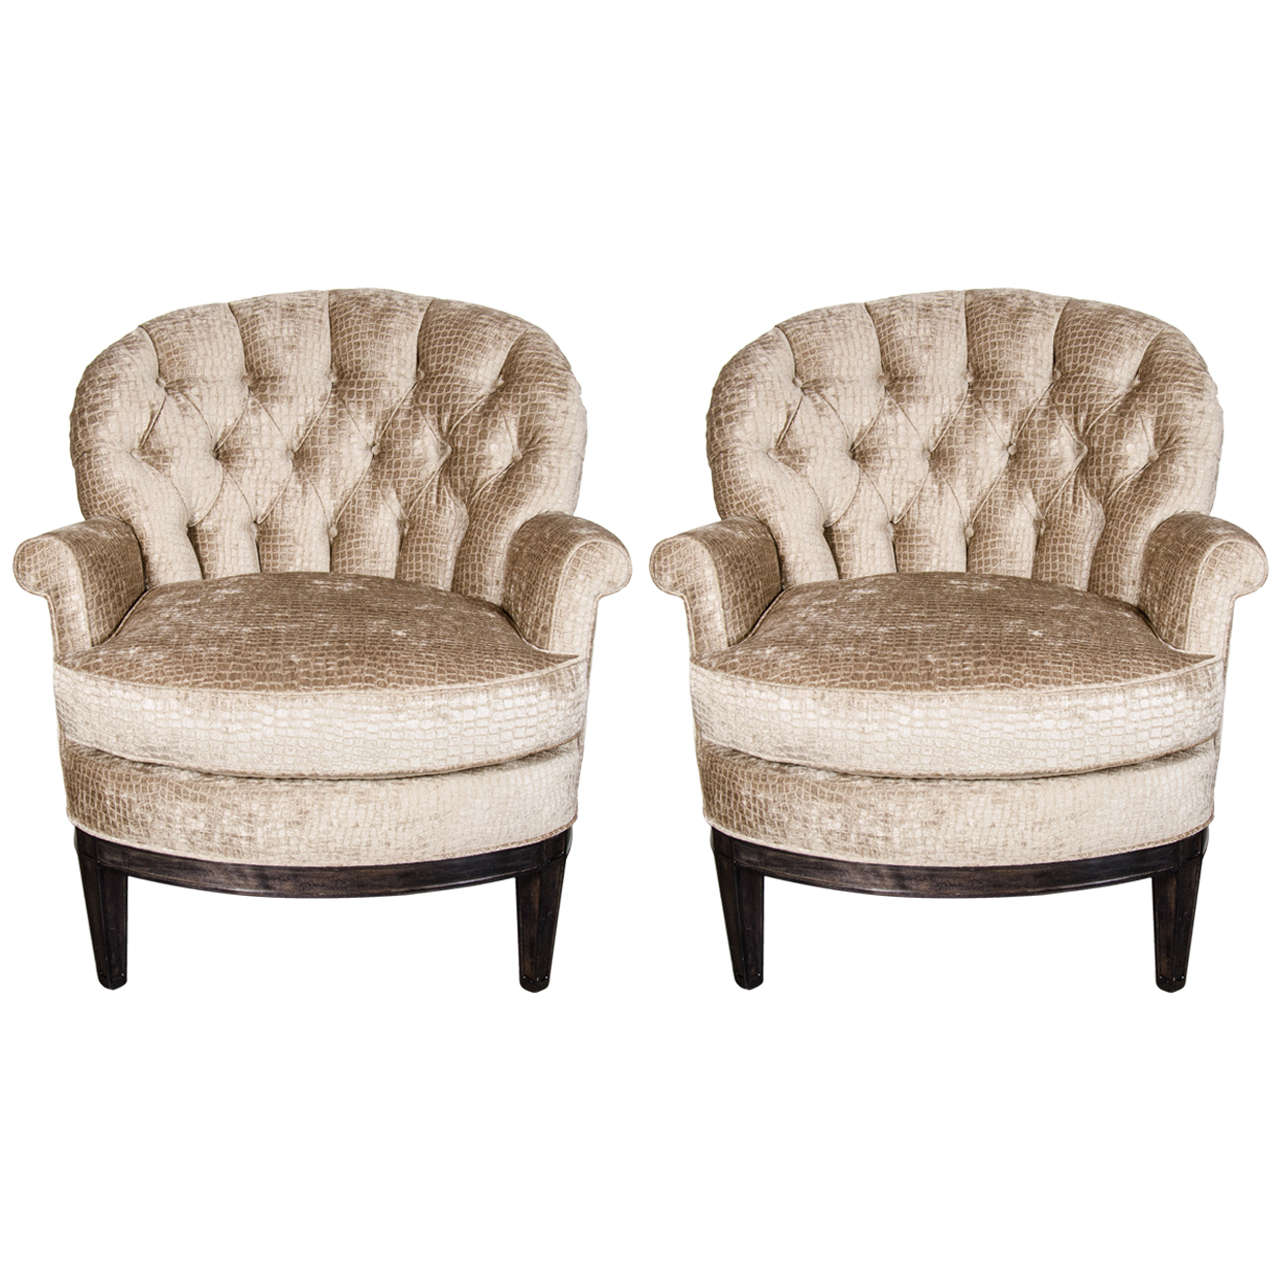 Pair of Mid-Century Tufted Club Chairs in Crocodile Gauffraged Velvet